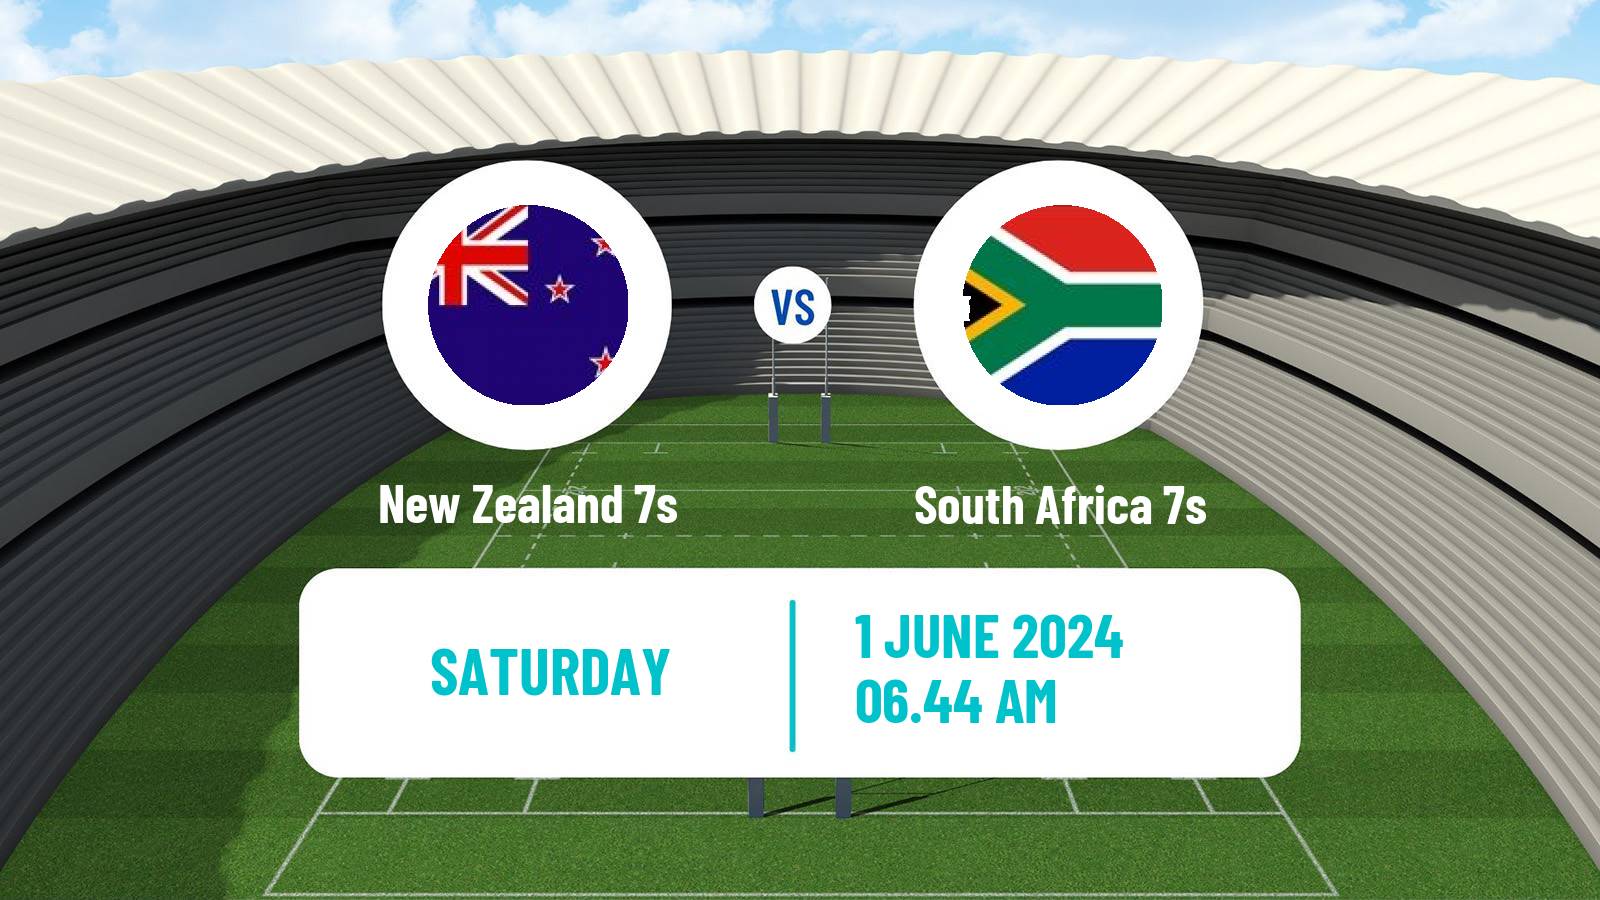 Rugby union Sevens World Series - Spain New Zealand 7s - South Africa 7s